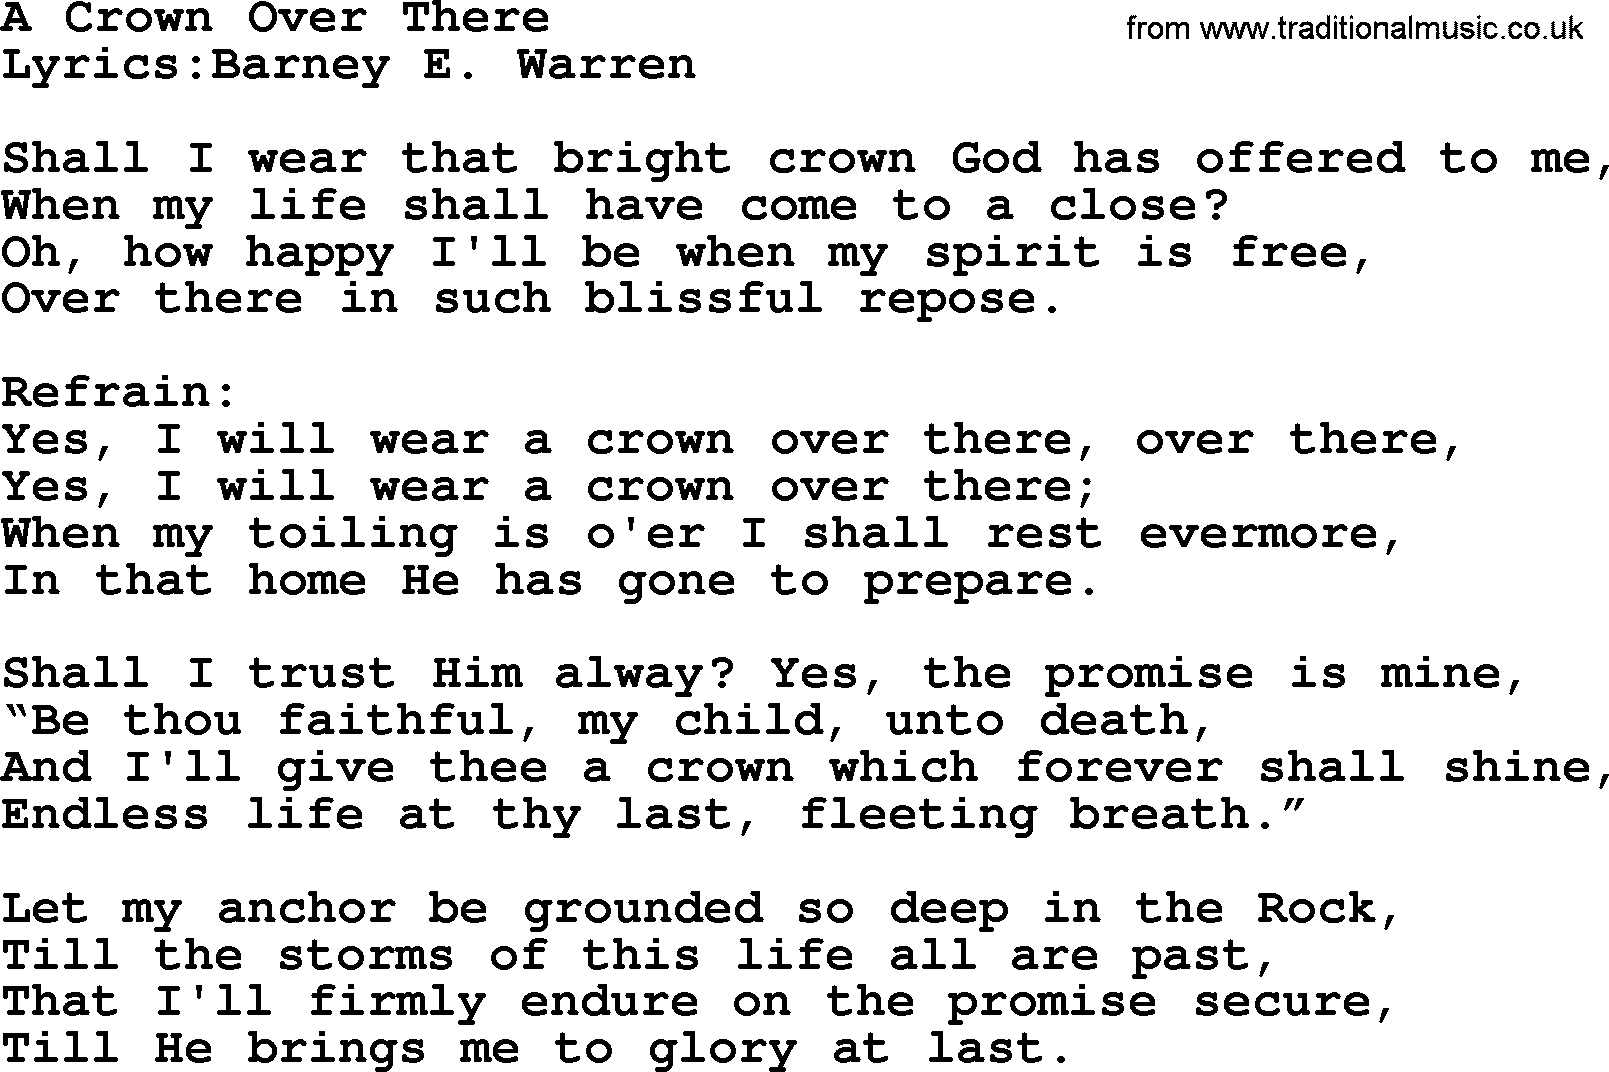 Songs and Hymns about Heaven: A Crown Over There lyrics with PDF